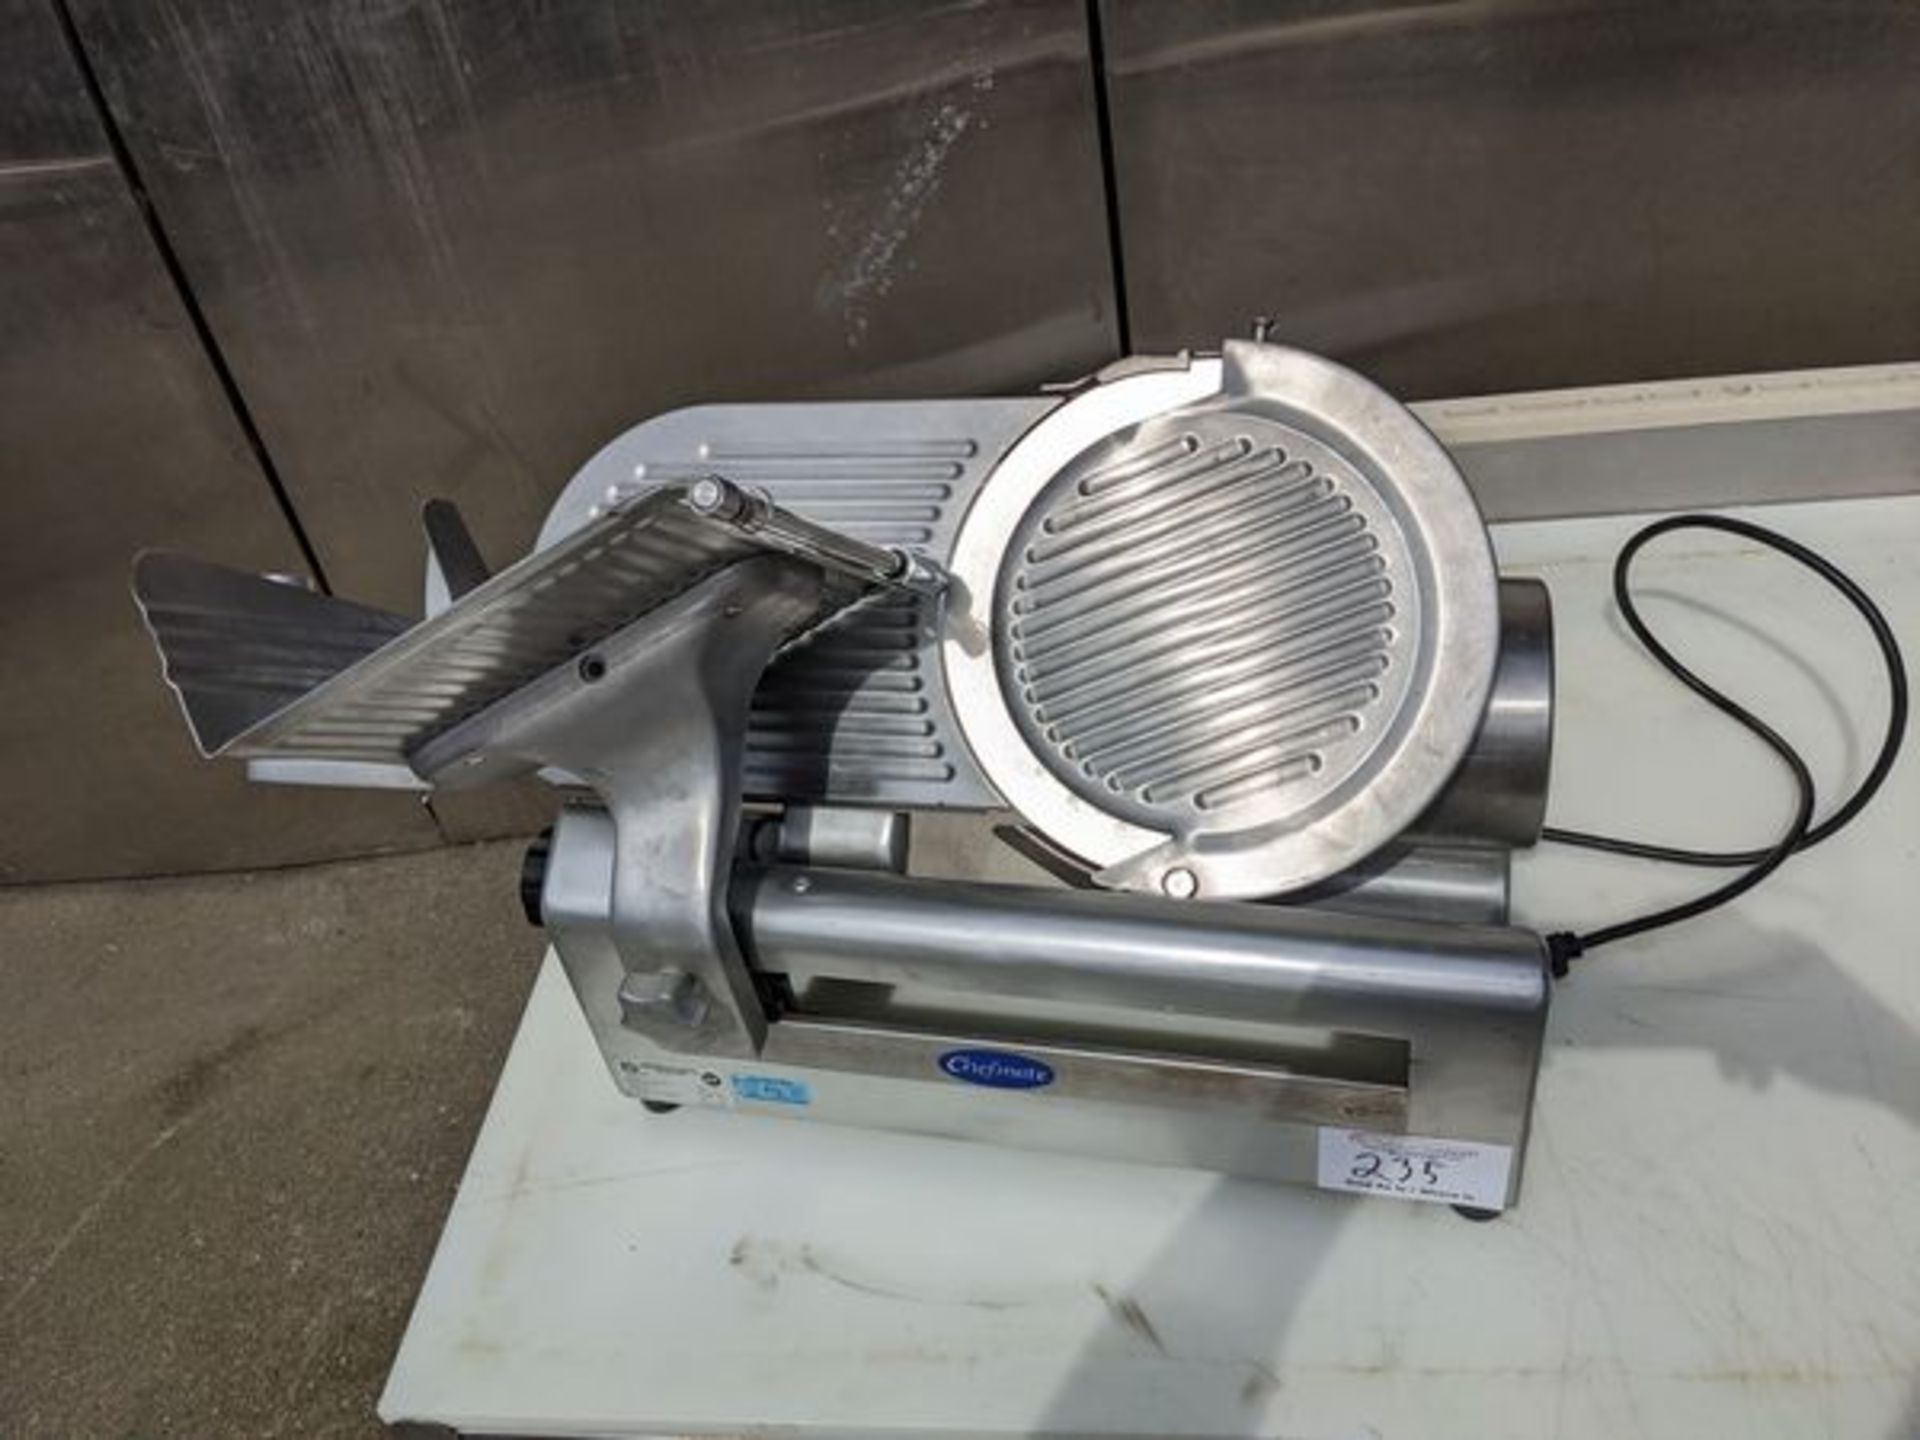 Chefmate GC512 Electric Meat Slicer